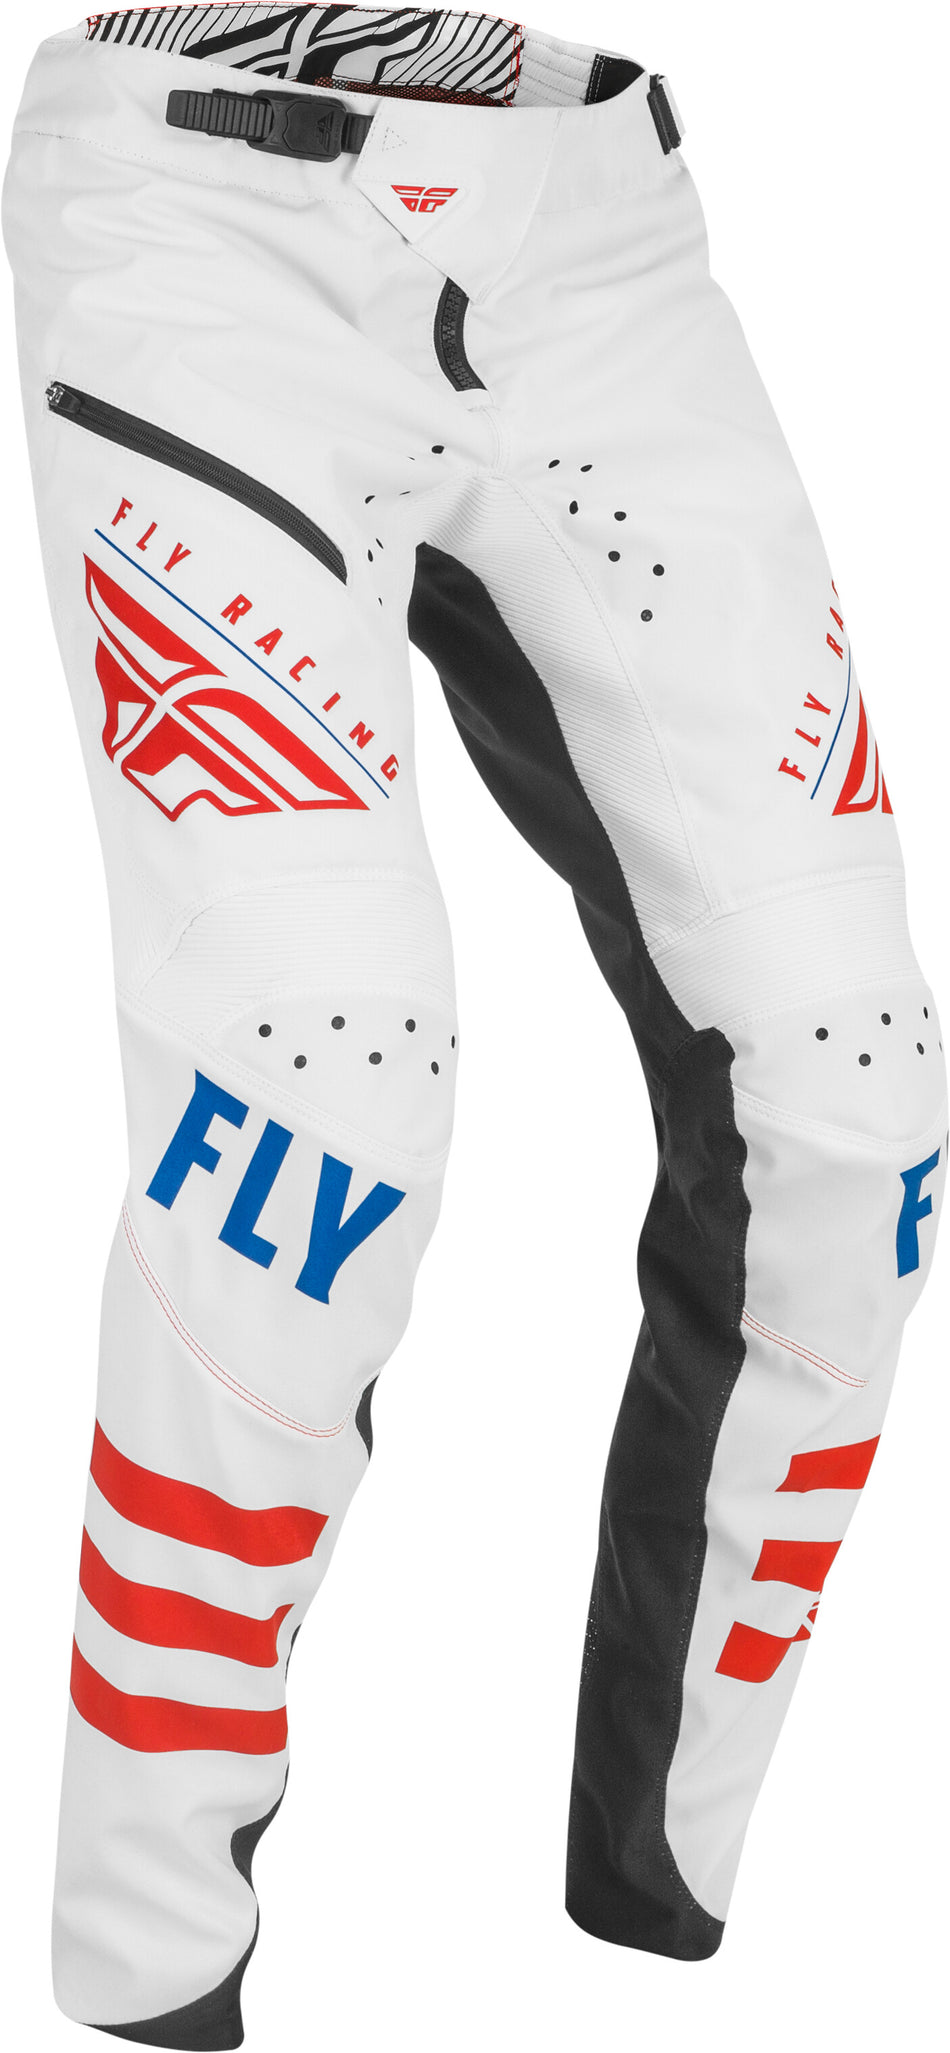 FLY RACING Kinetic Bicycle Le Pants White/Red/Blue Sz 30 374-04430